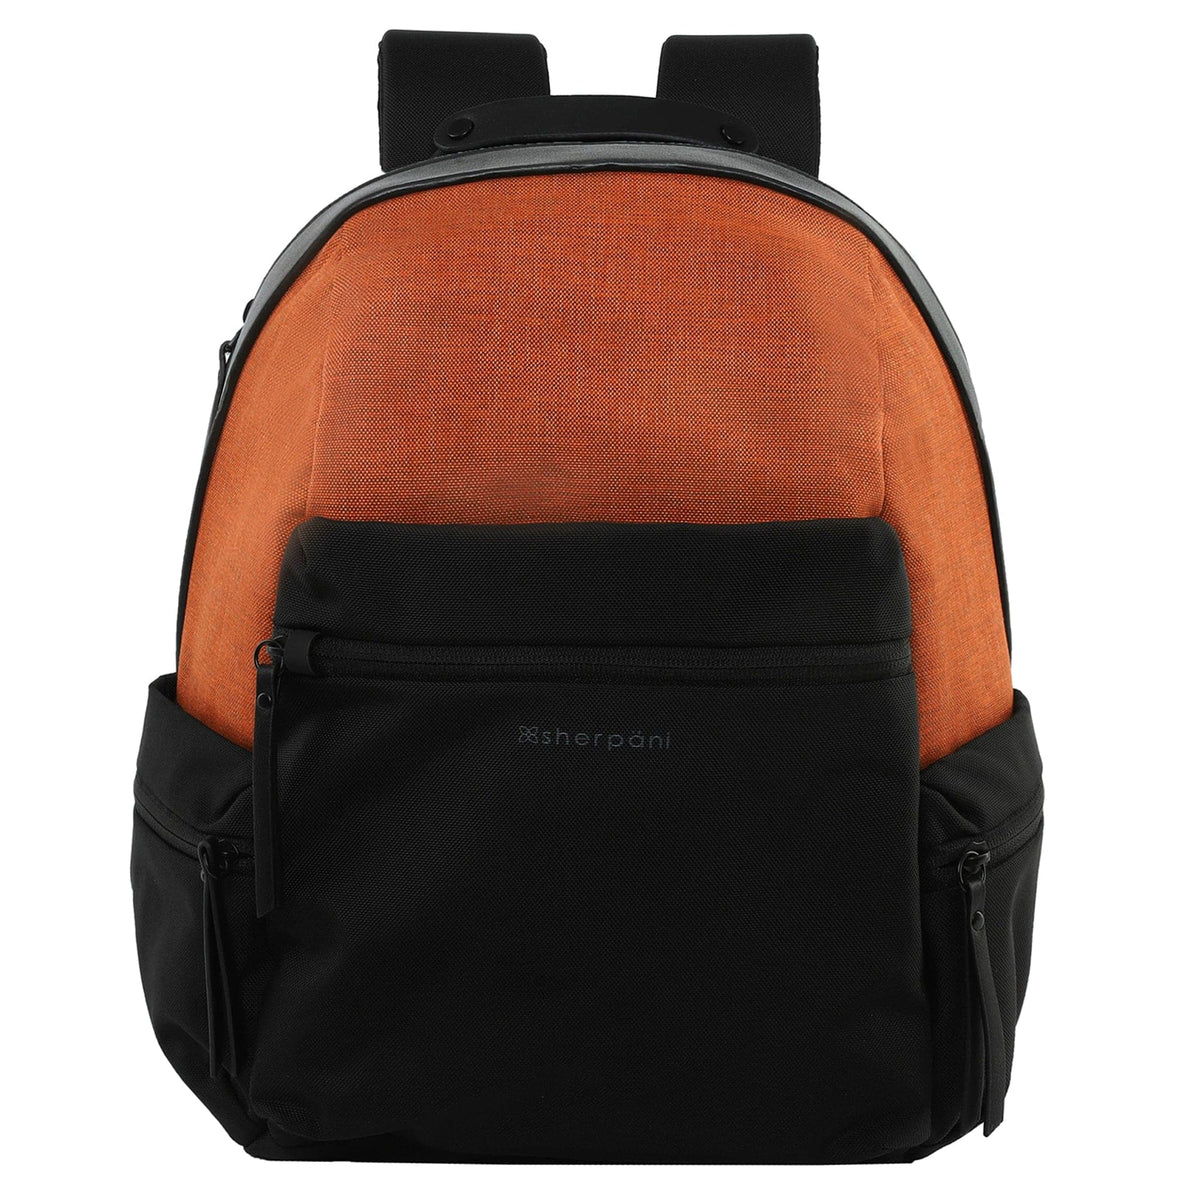 Sherpani Anti-Theft Indie AT Backpack